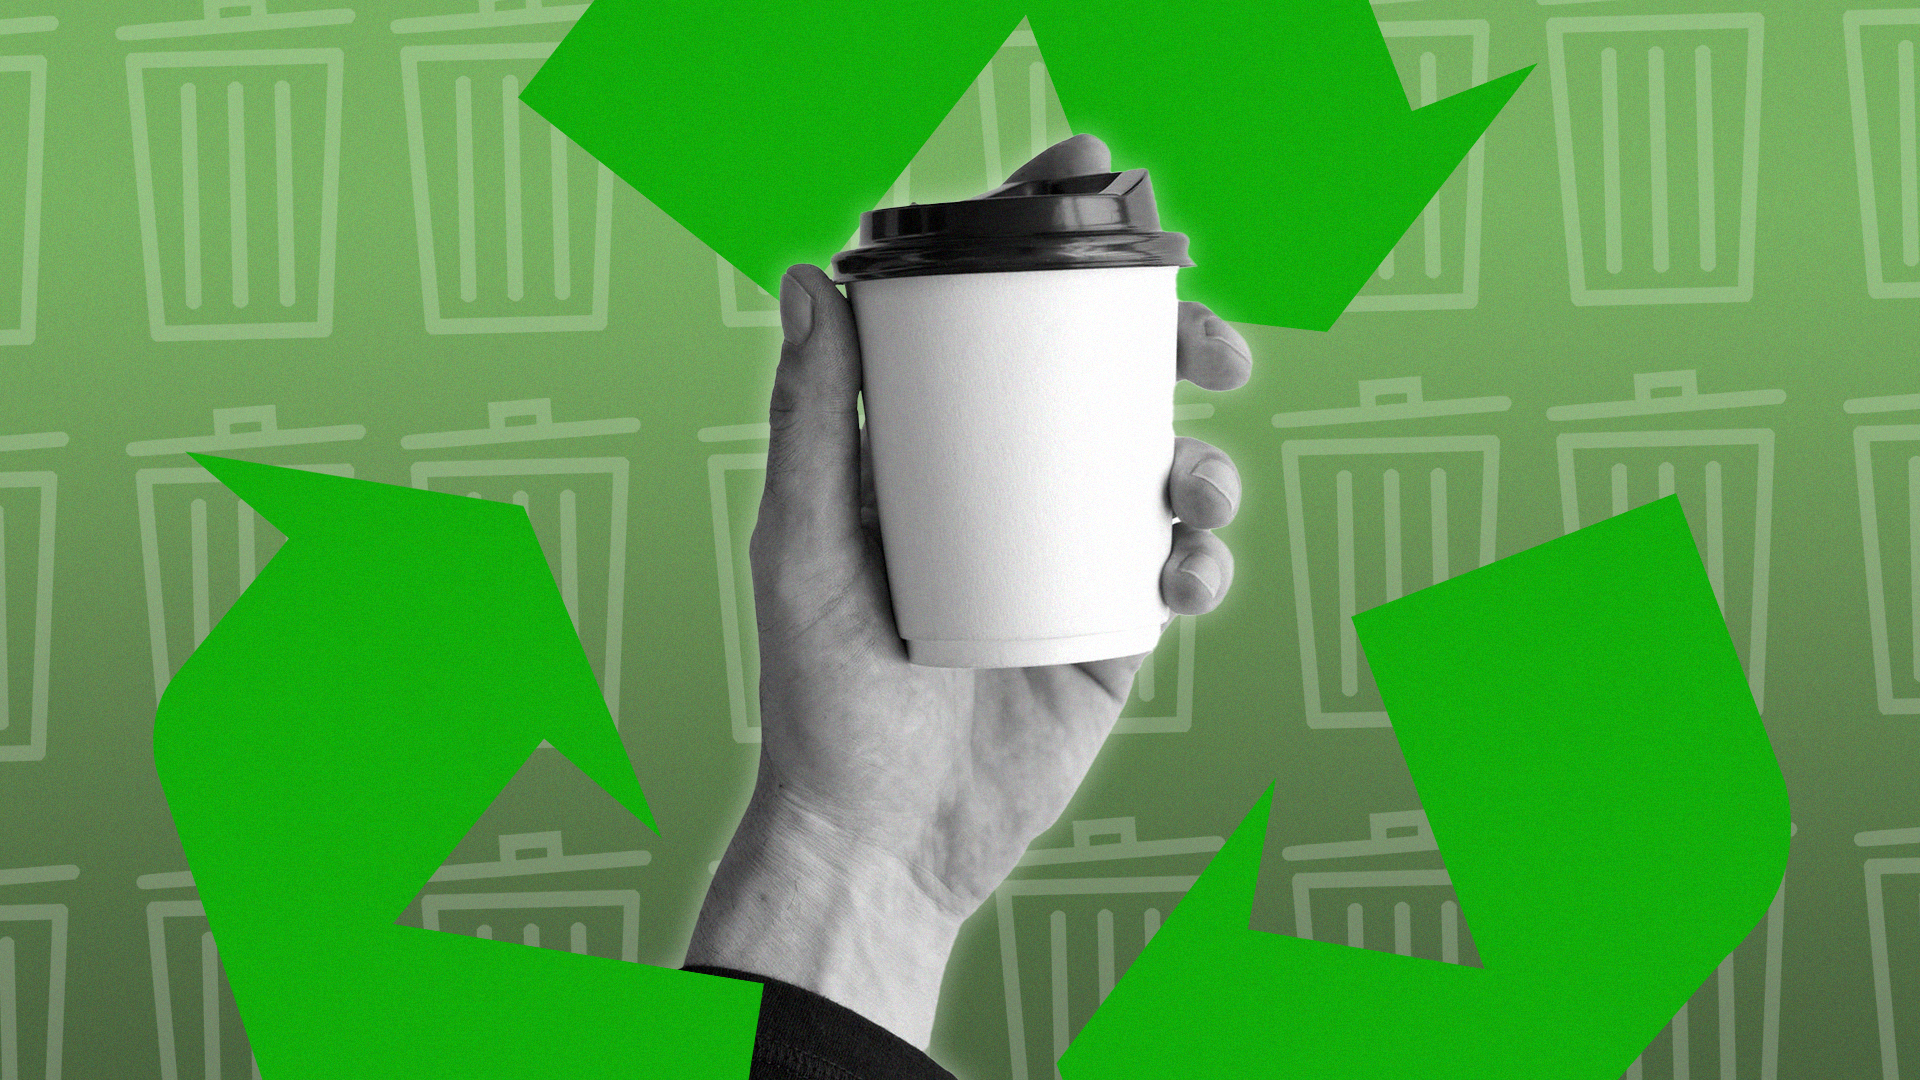 Take-out coffee cups may be shedding trillions of plastic